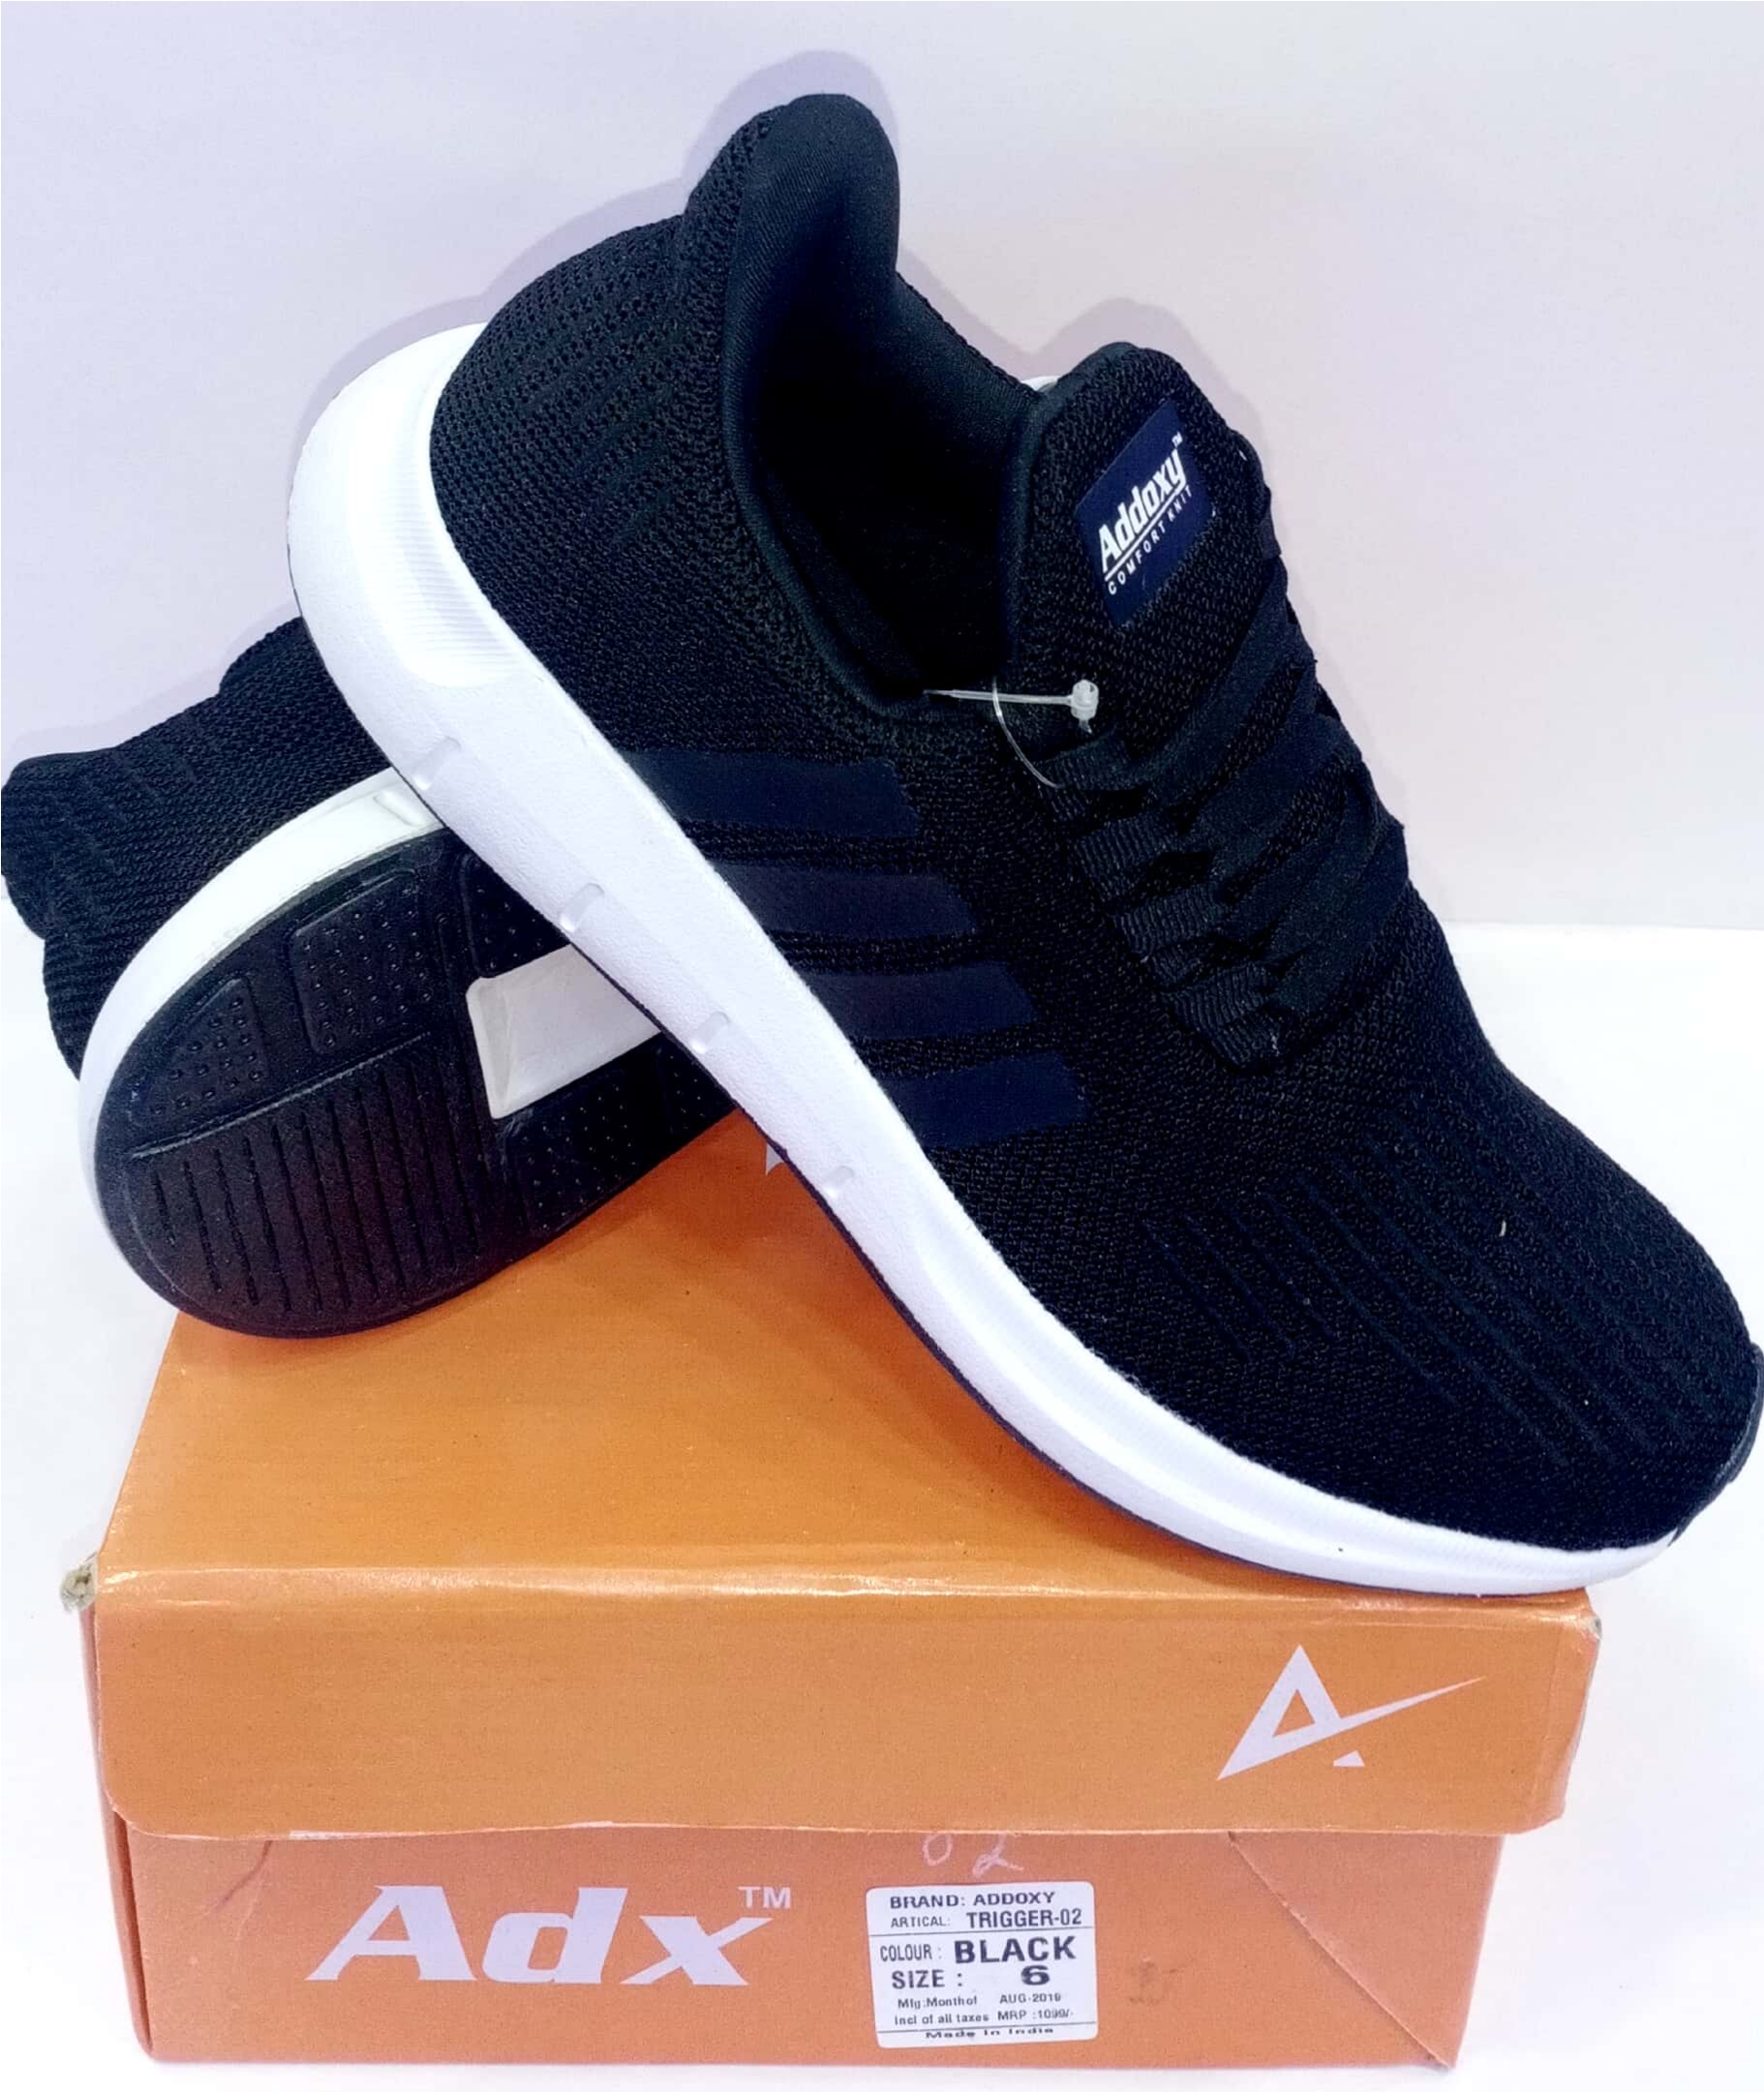 addoxy shoes new